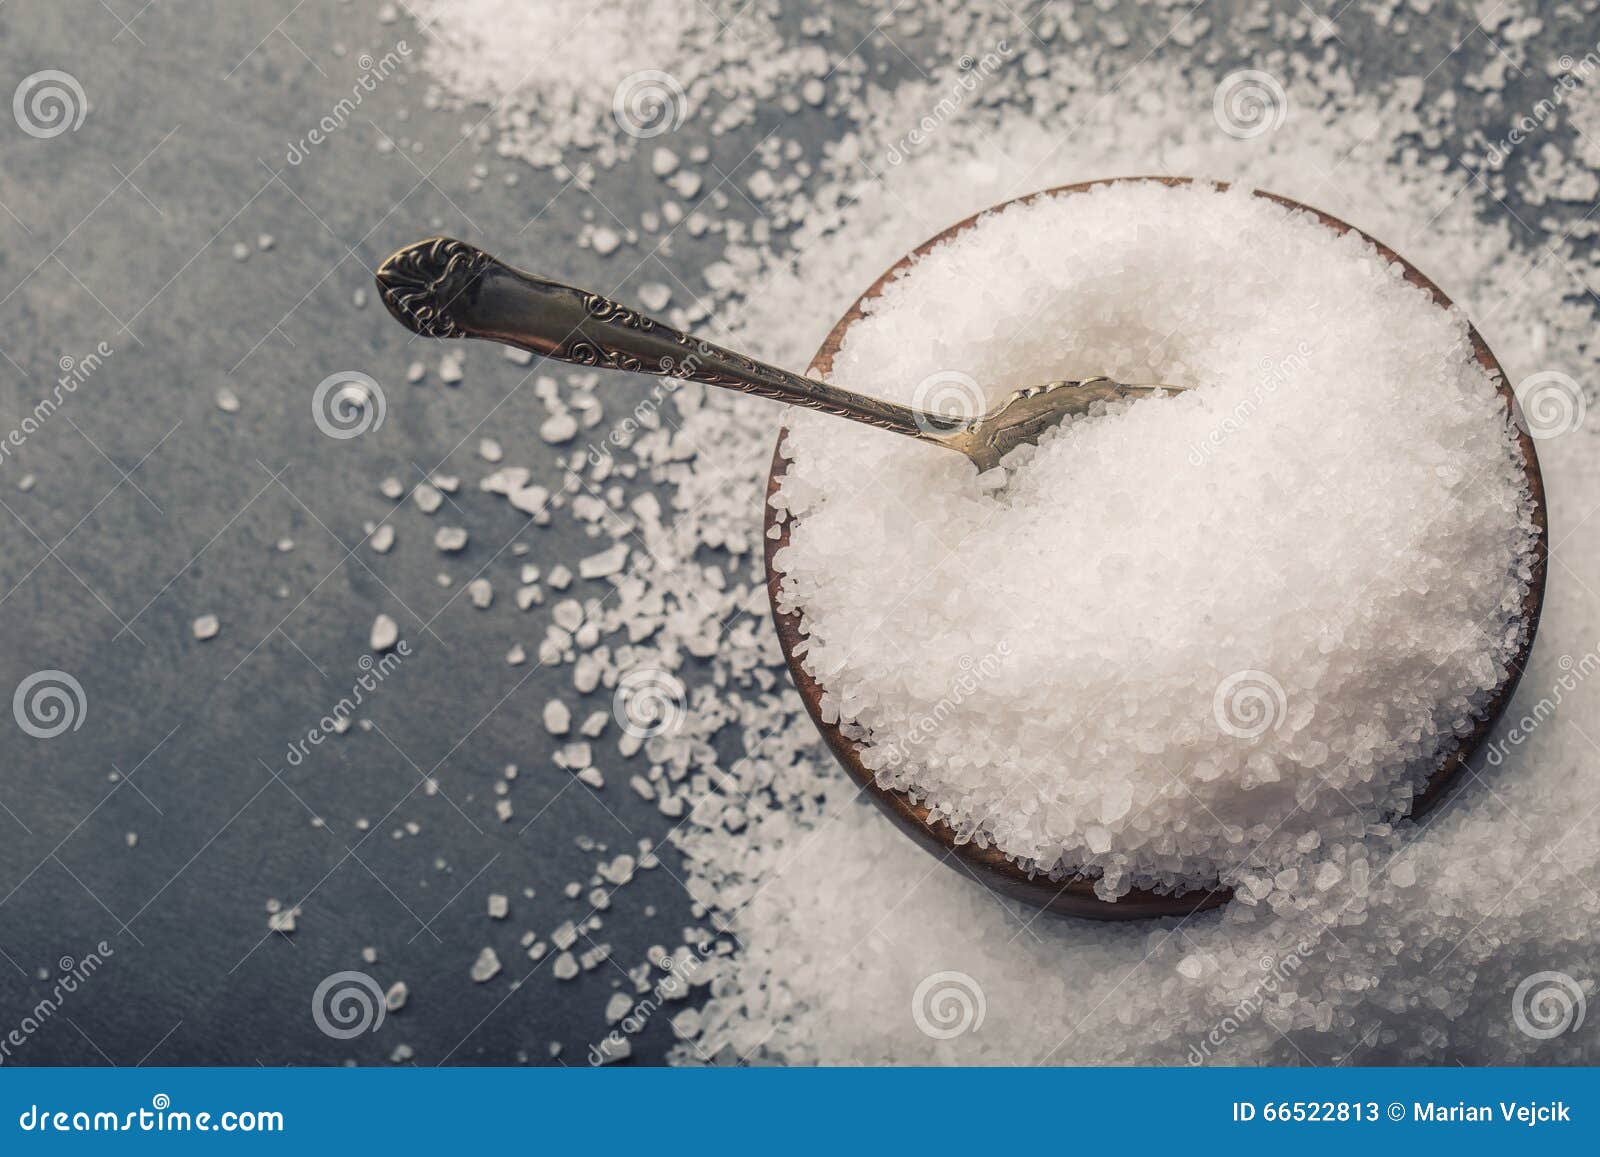 salt. coarse grained sea salt on granite - concrete stone background with vintage spoon and wooden bowl